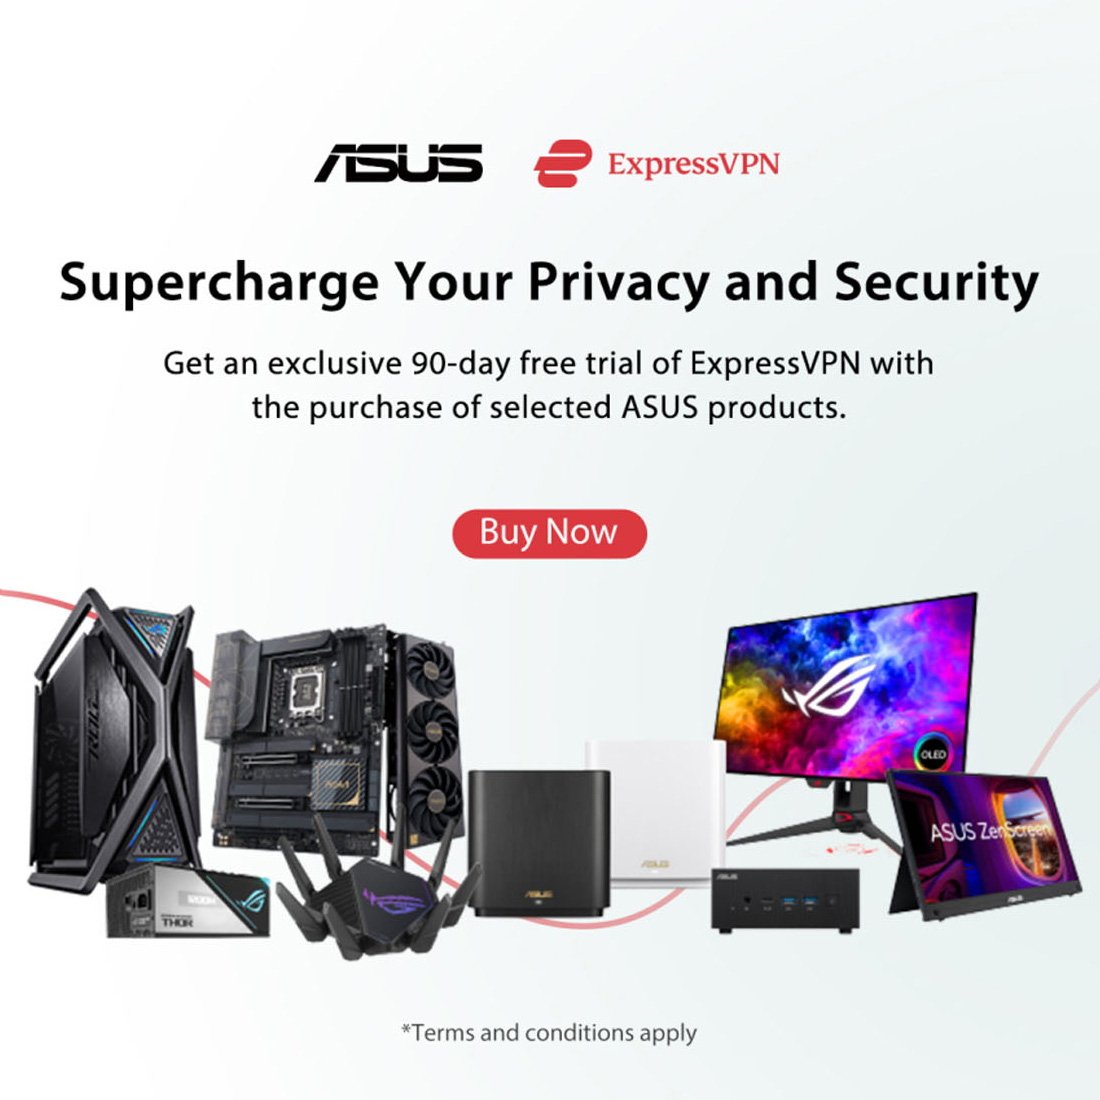 Offer ends tomorrow! Don't miss out! Keep your system safe and private with ExpressVPN when shopping for selected ASUS products at AWD-IT🔒 SHOP NOW > tinyurl.com/2vpypfz7 @asusuk @expressvpn #gamingsetup #gamingpc #pcgaming #gaming #asus #NvidiaRTX #ExpressVPN